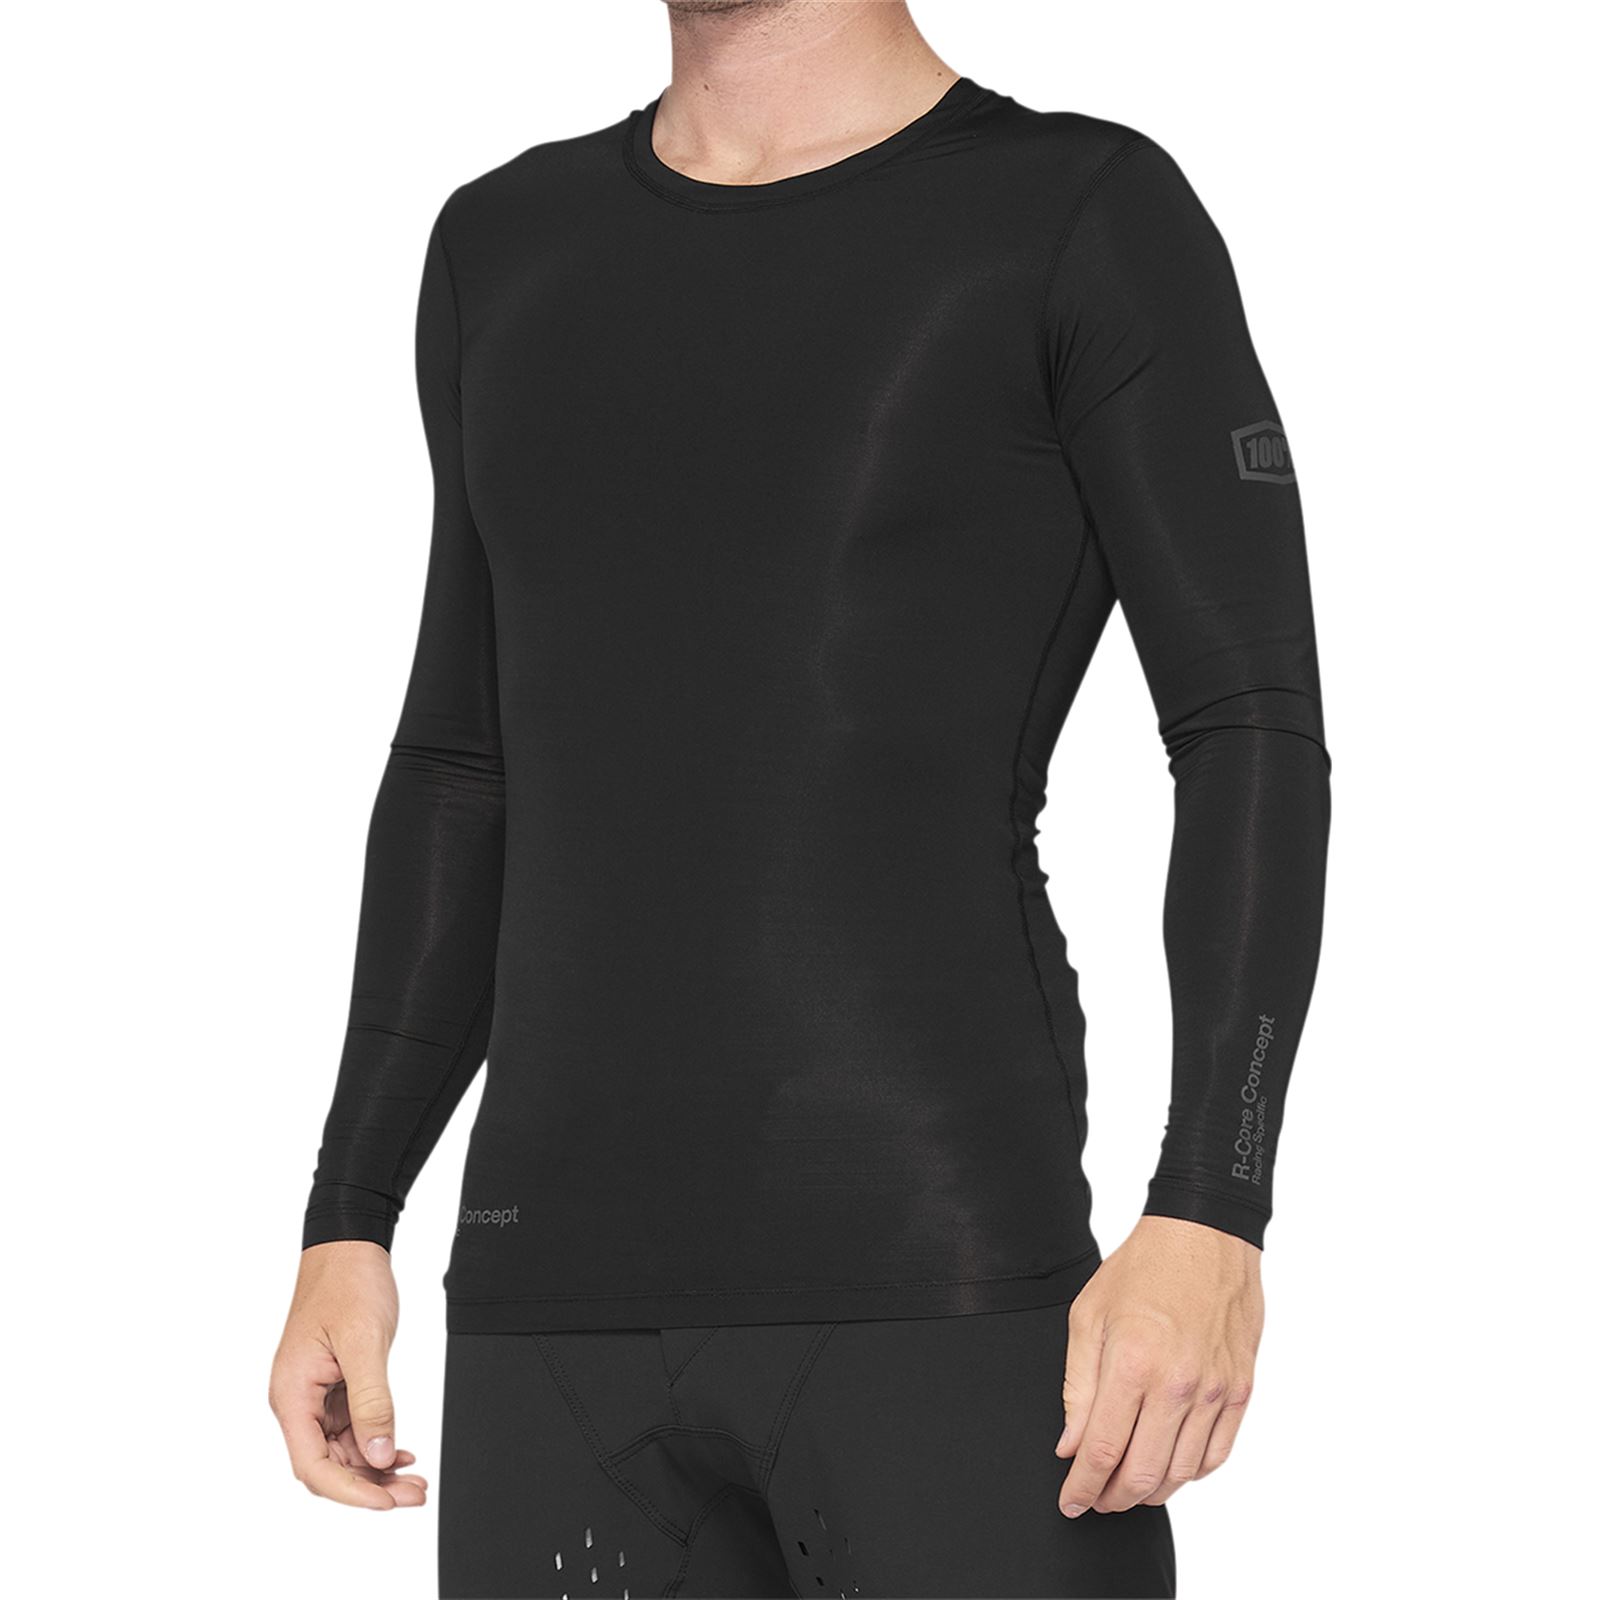 100% R-Core Concept Long-Sleeve Jersey - Black - Large